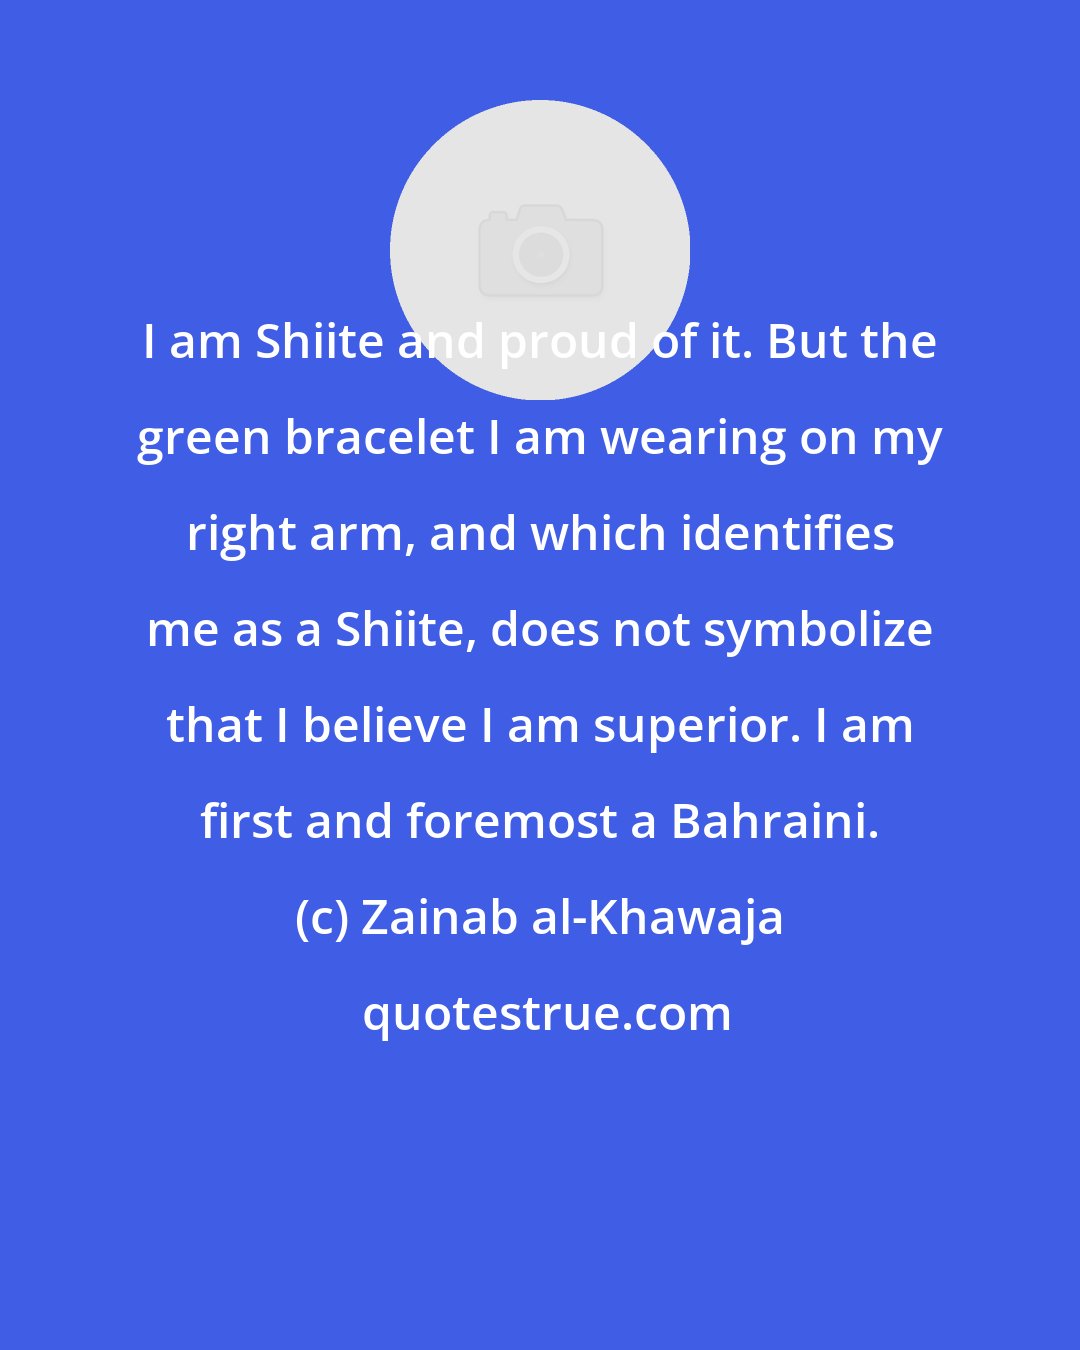 Zainab al-Khawaja: I am Shiite and proud of it. But the green bracelet I am wearing on my right arm, and which identifies me as a Shiite, does not symbolize that I believe I am superior. I am first and foremost a Bahraini.